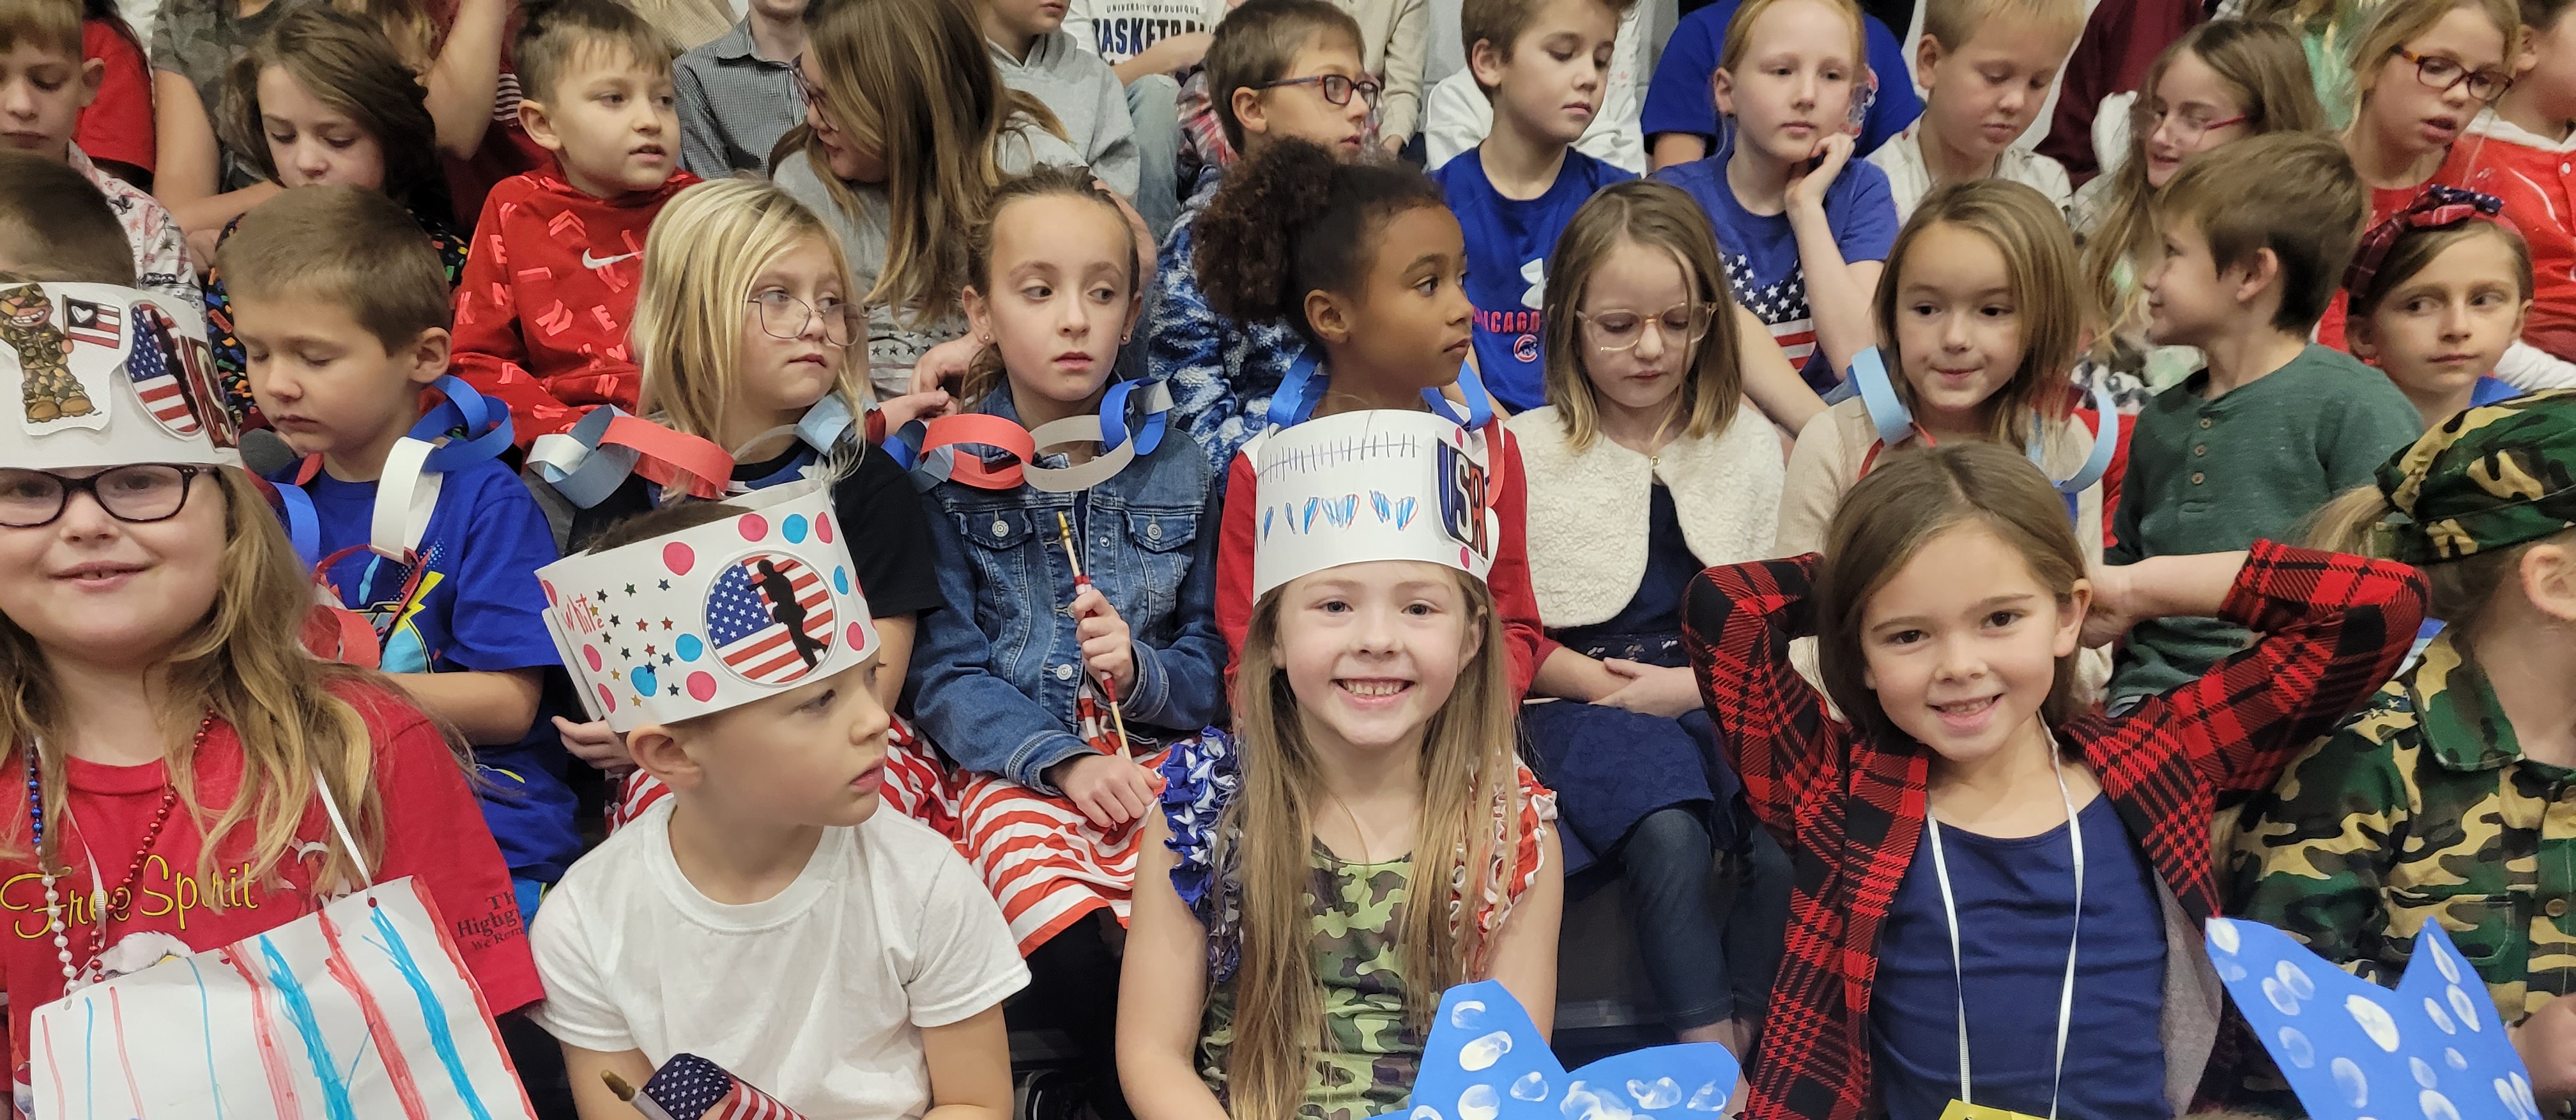 children sitting together, wearing red white and blue hats made for veterans day